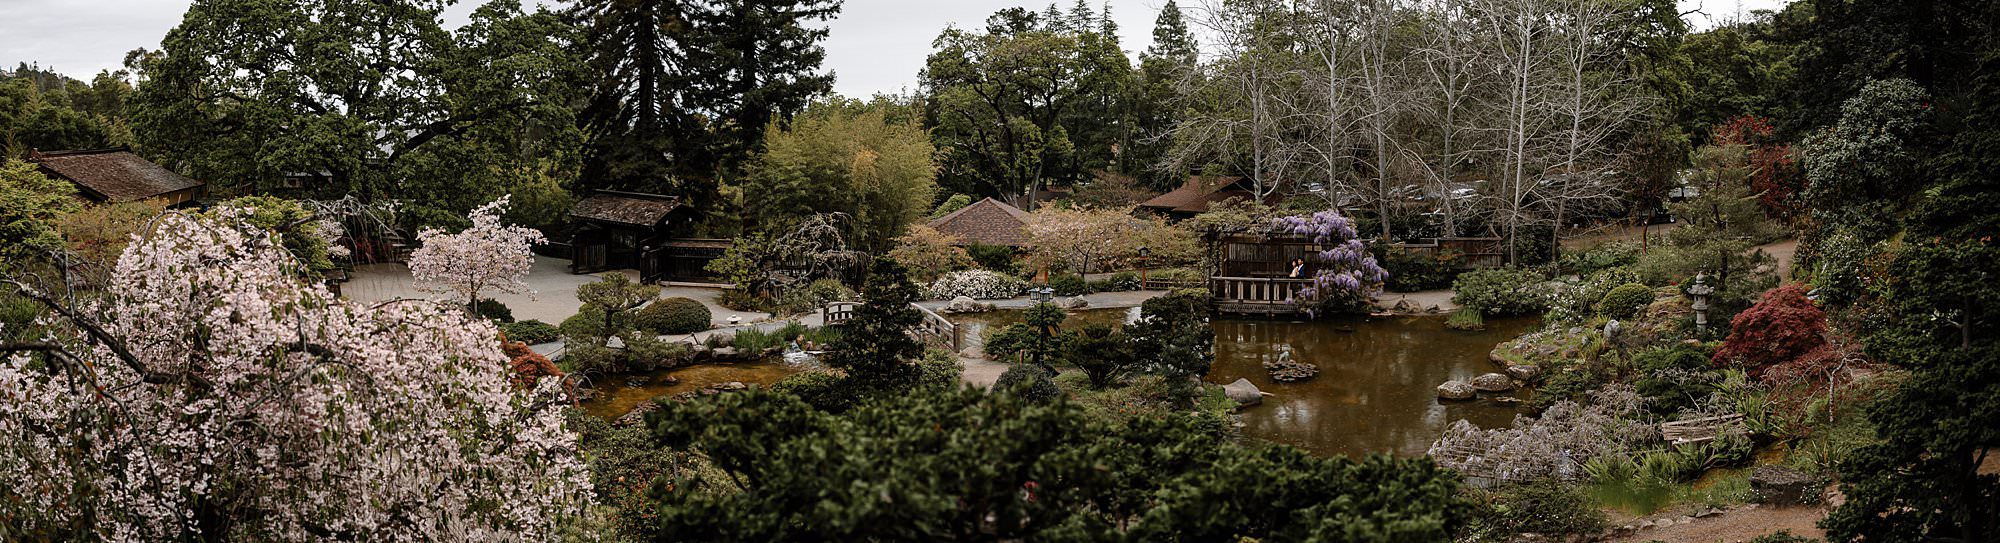 Panoramic photograph of Hakone Estate from the balcony overlooking the gardens